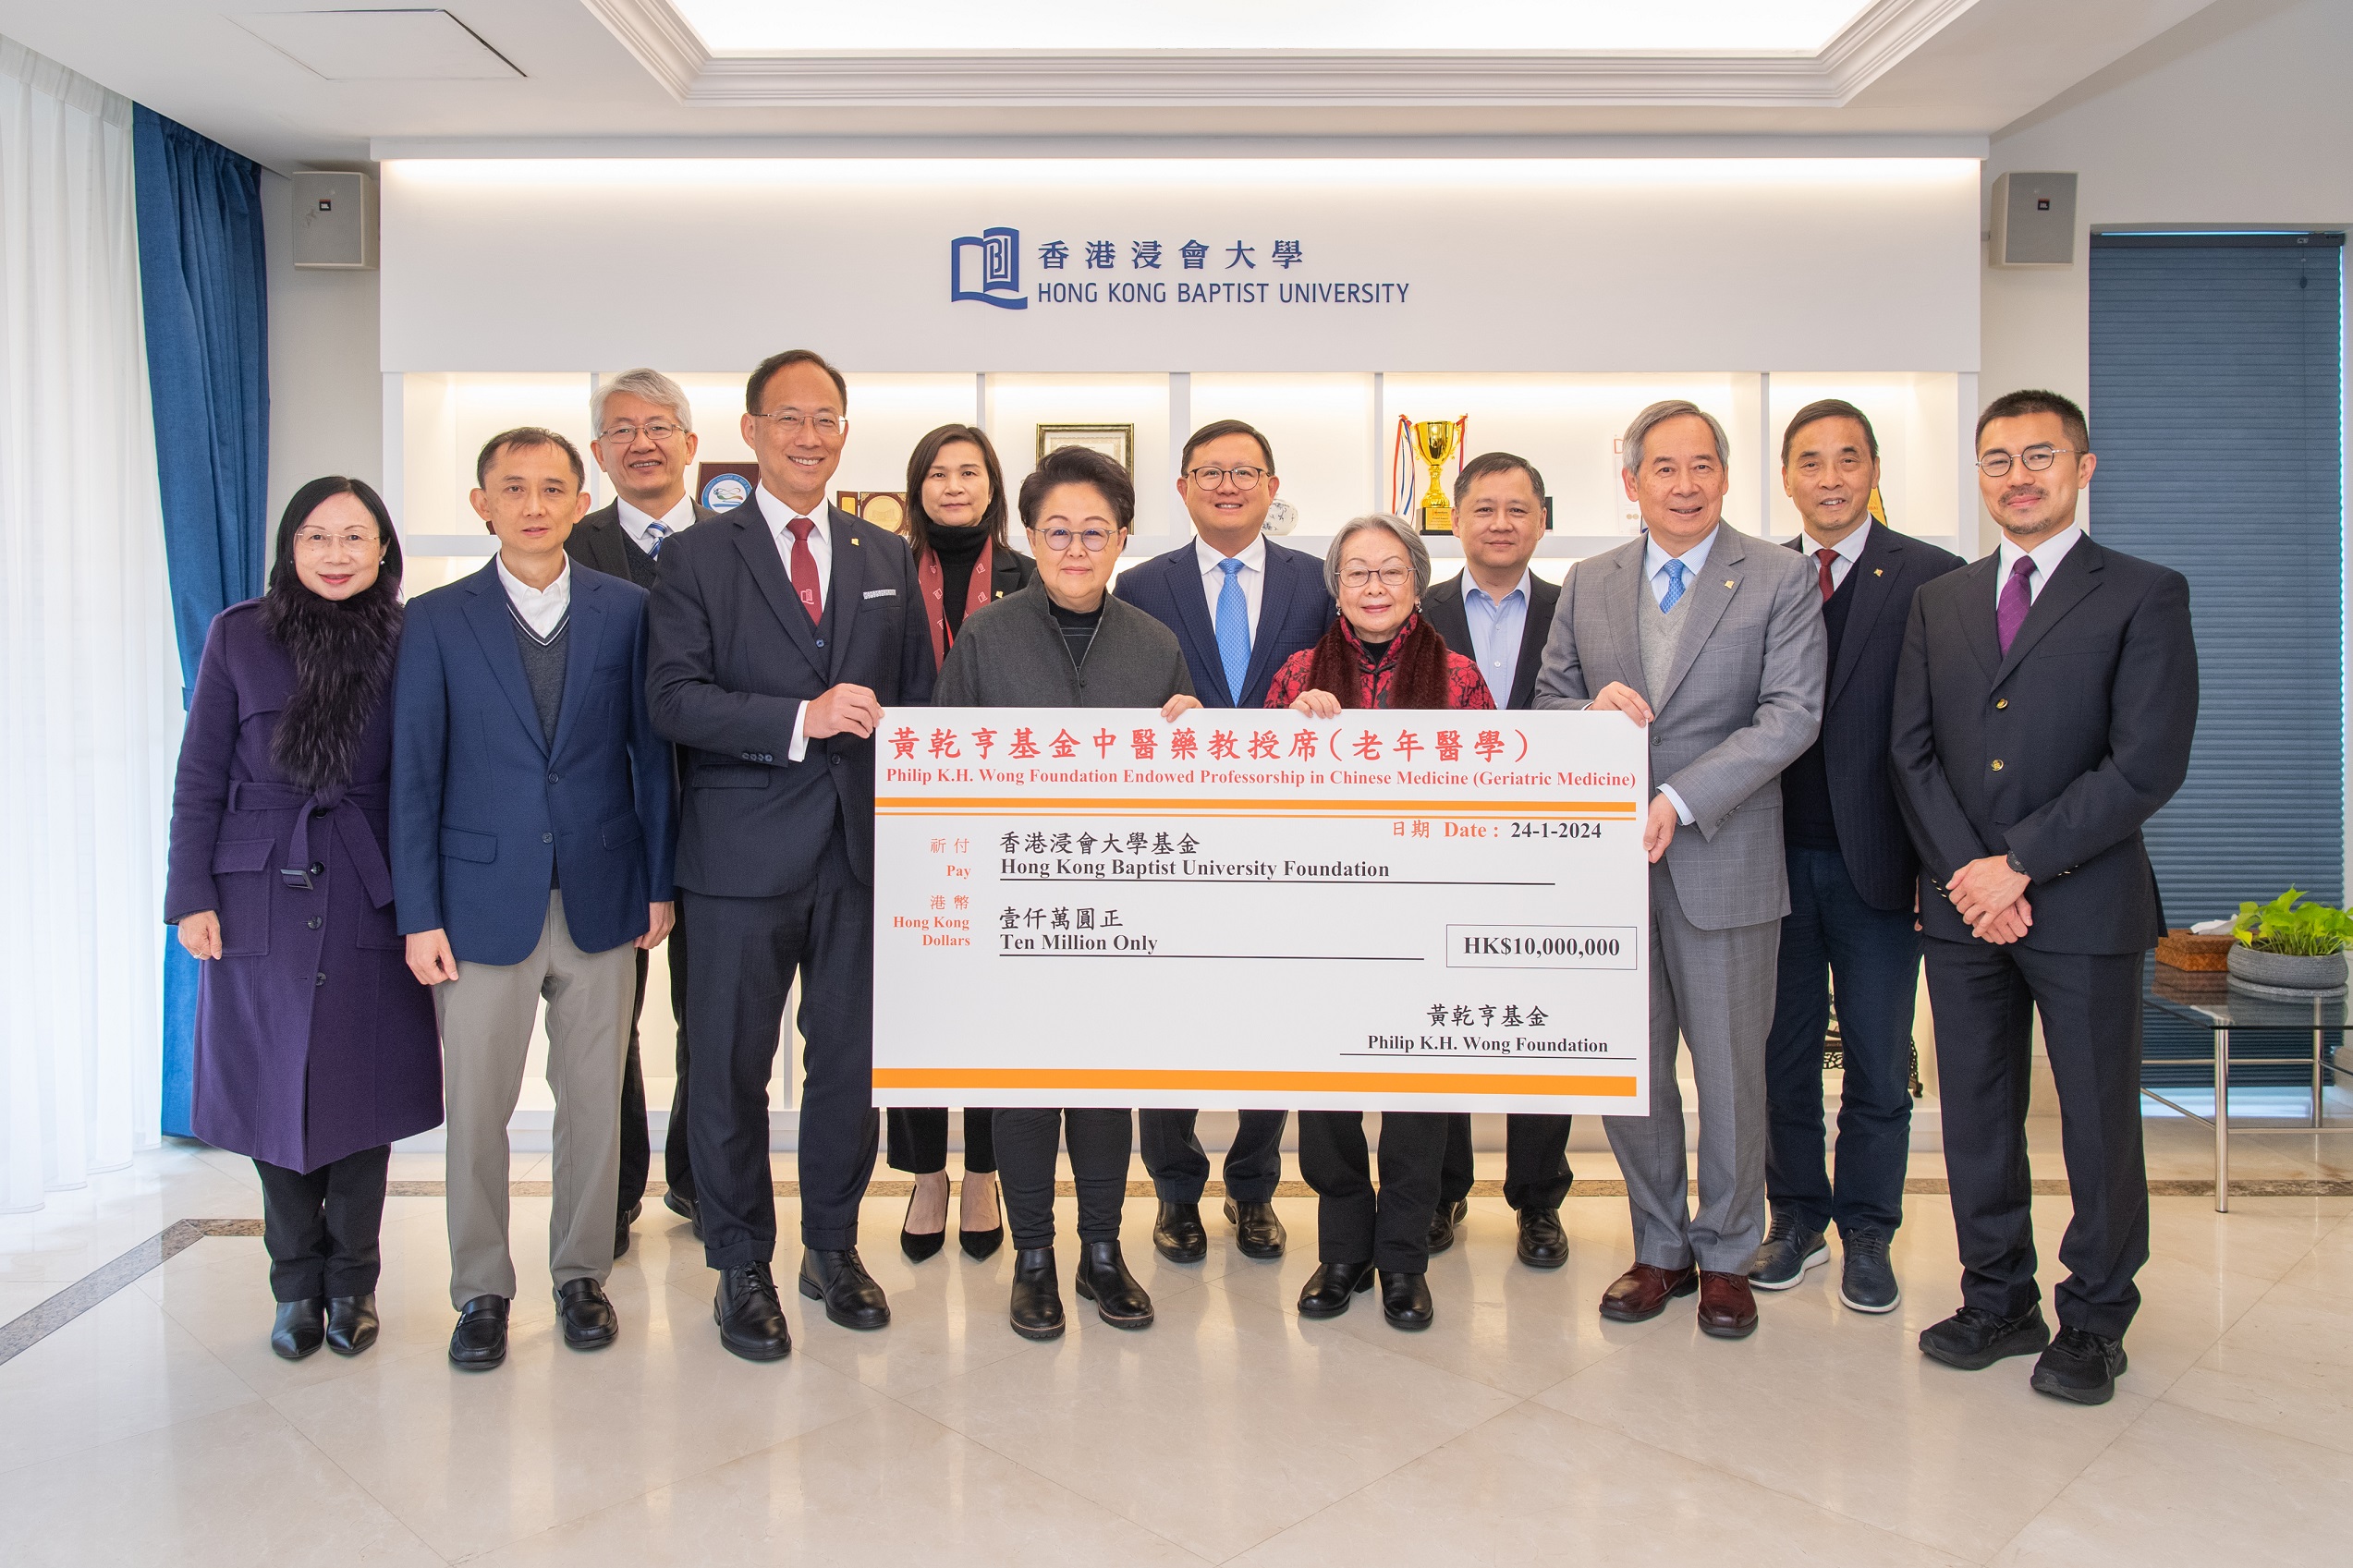 Dr Clement Chen (third right), on behalf of HKBU, presents a souvenir to Mrs Gertrude Wong, Chairman of the Board of the Philip K.H. Wong Foundation (fifth right), and other Foundation Councillors.